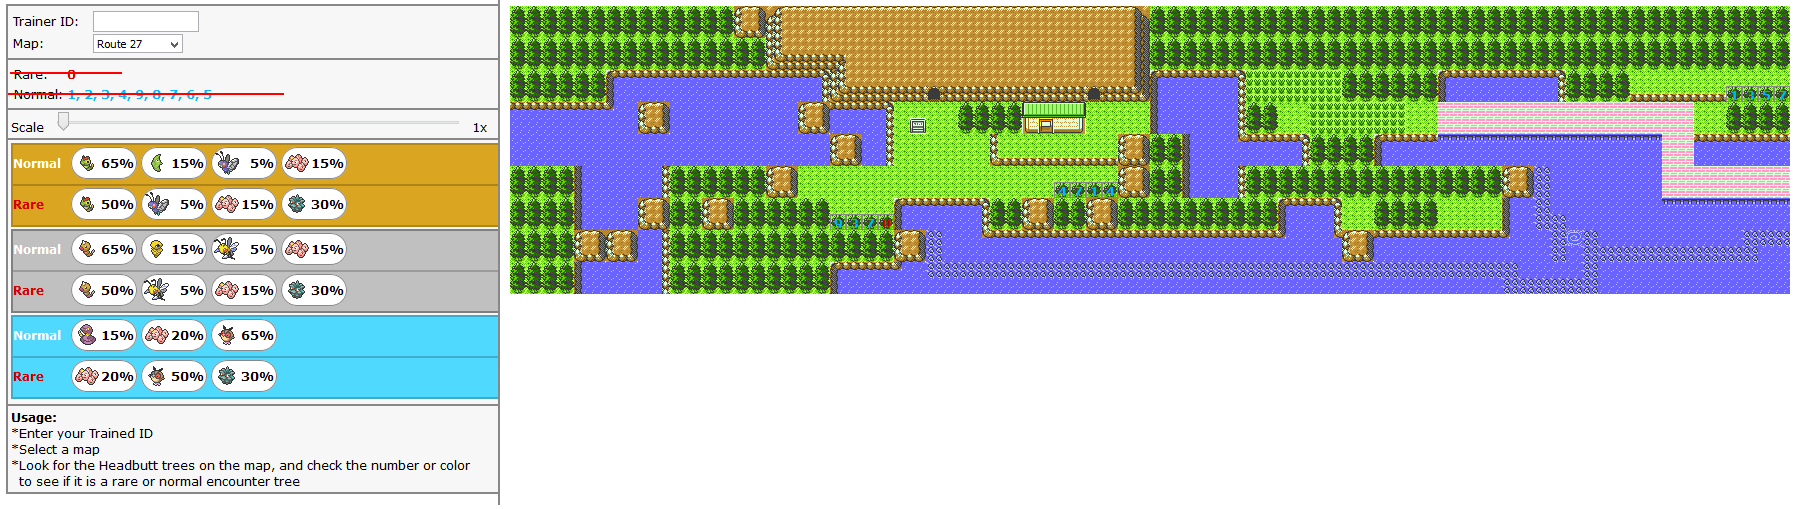 Route 27.png